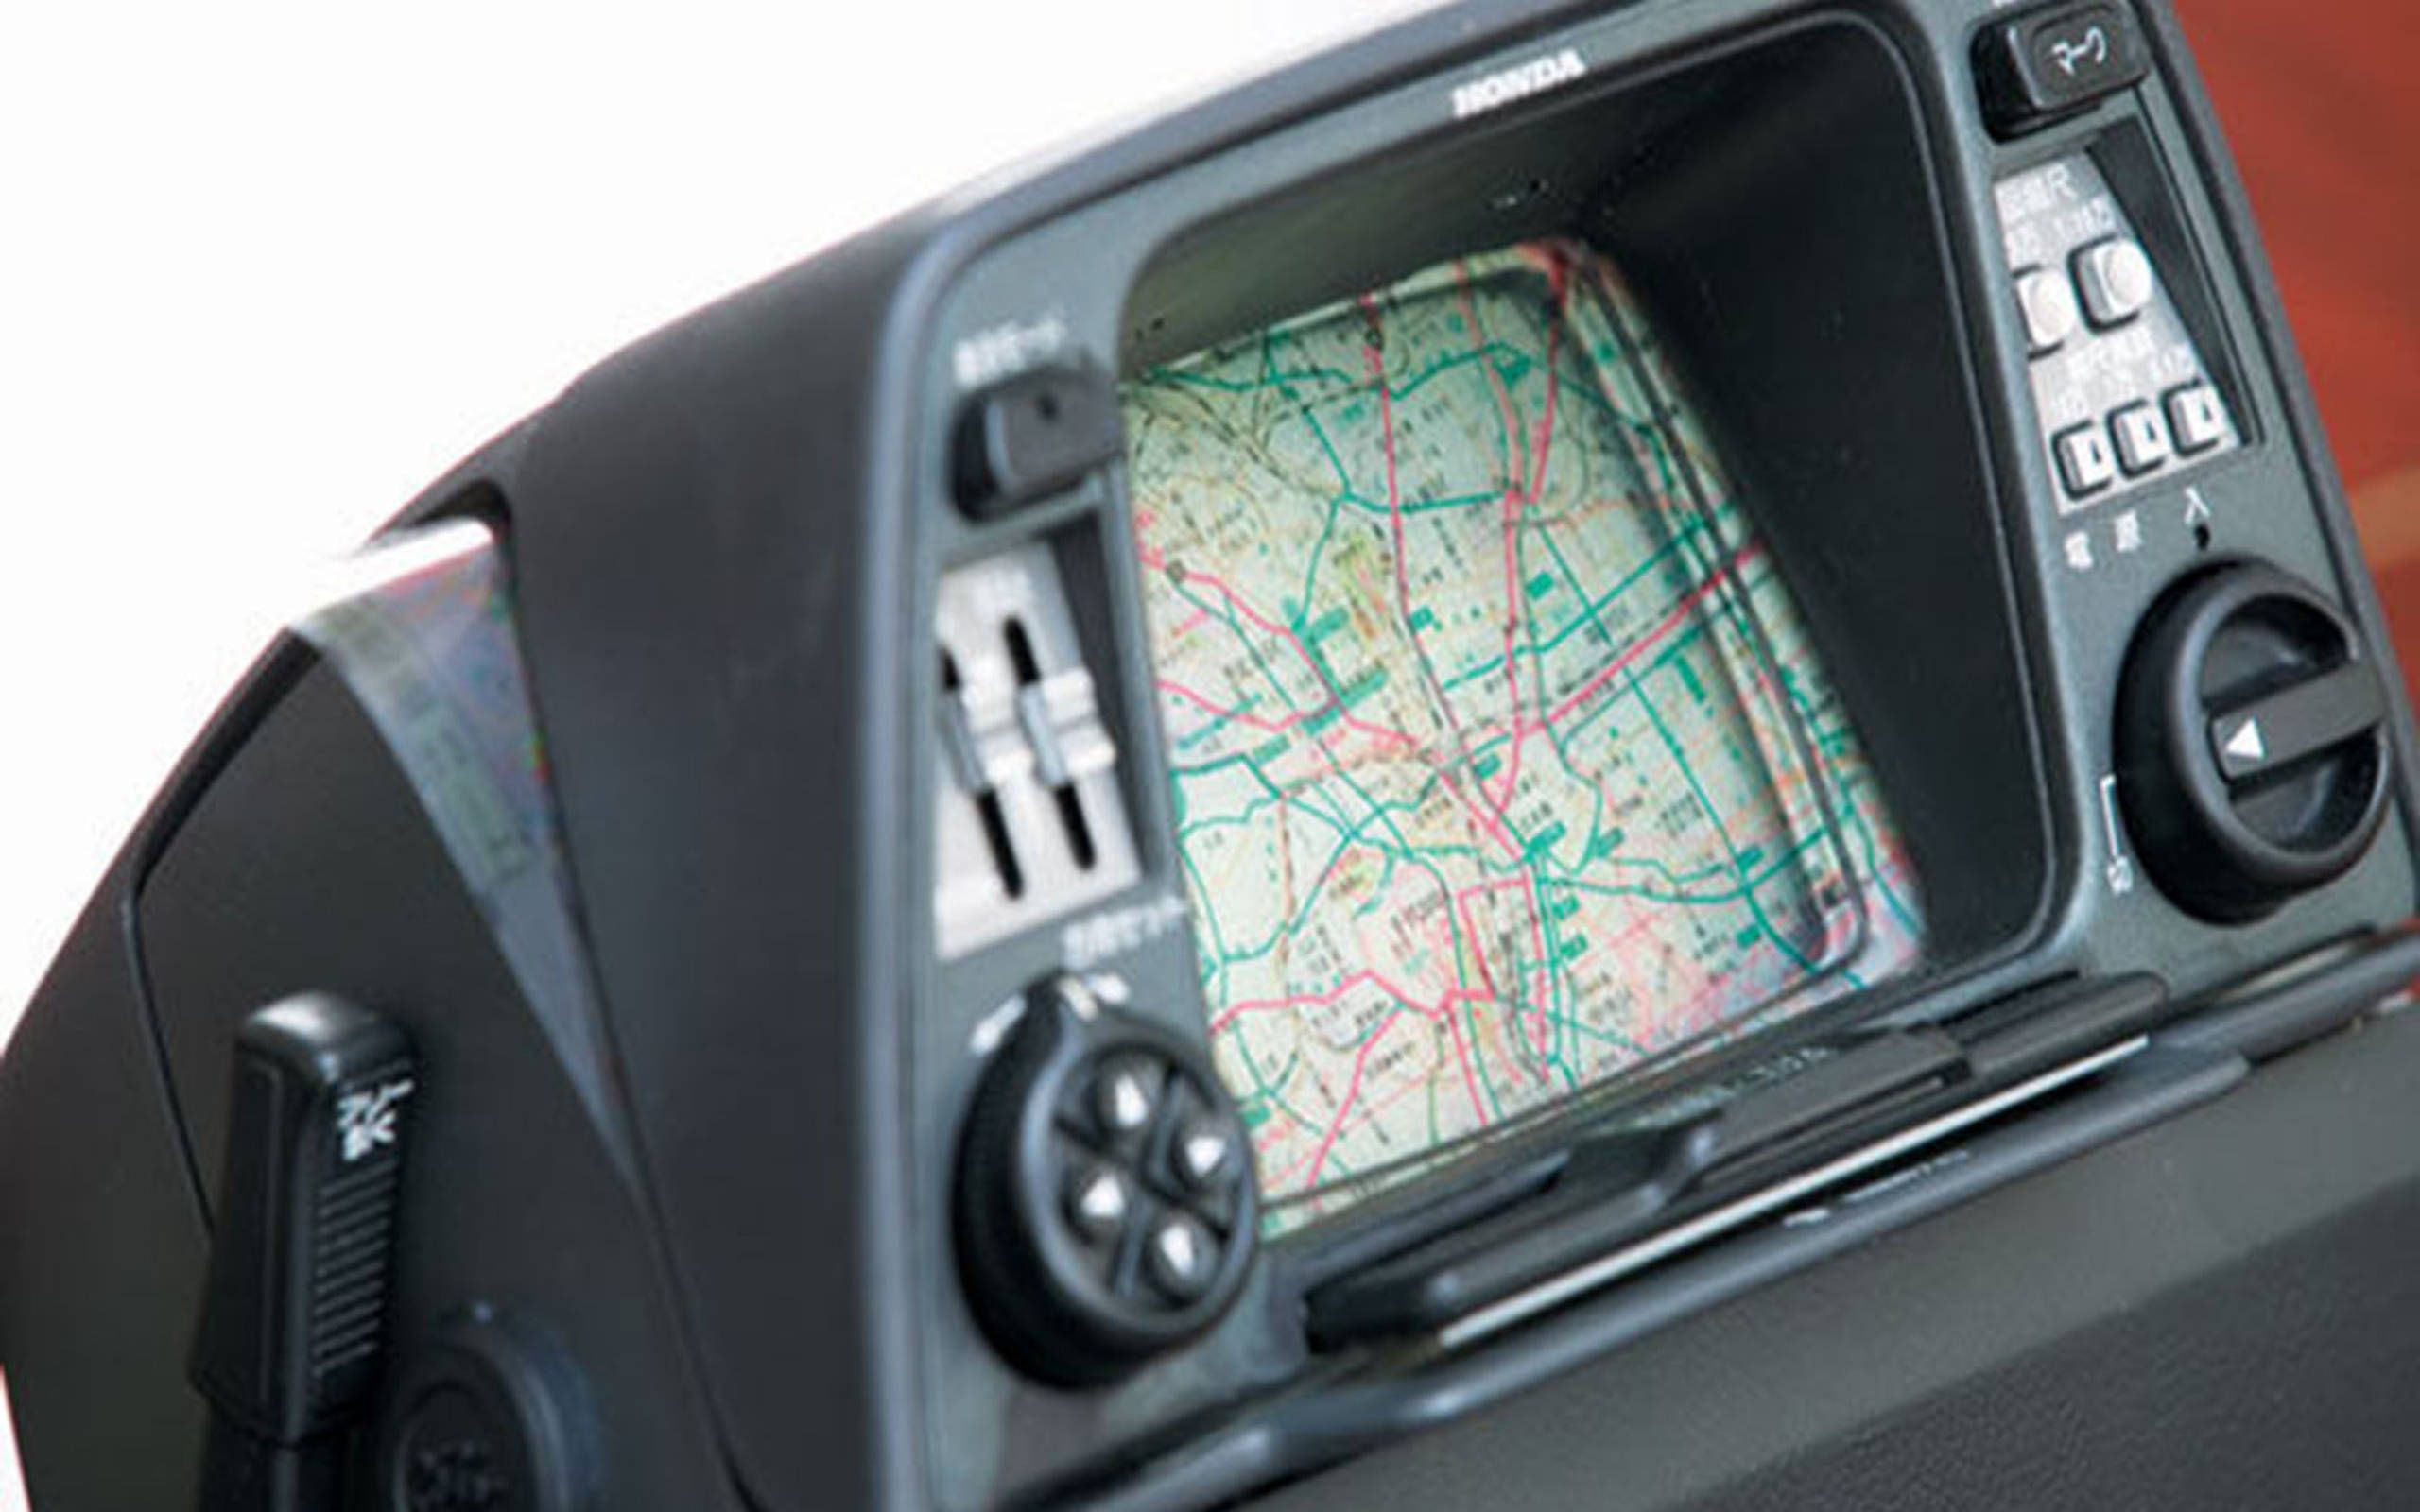 Honda invents the first navigation system